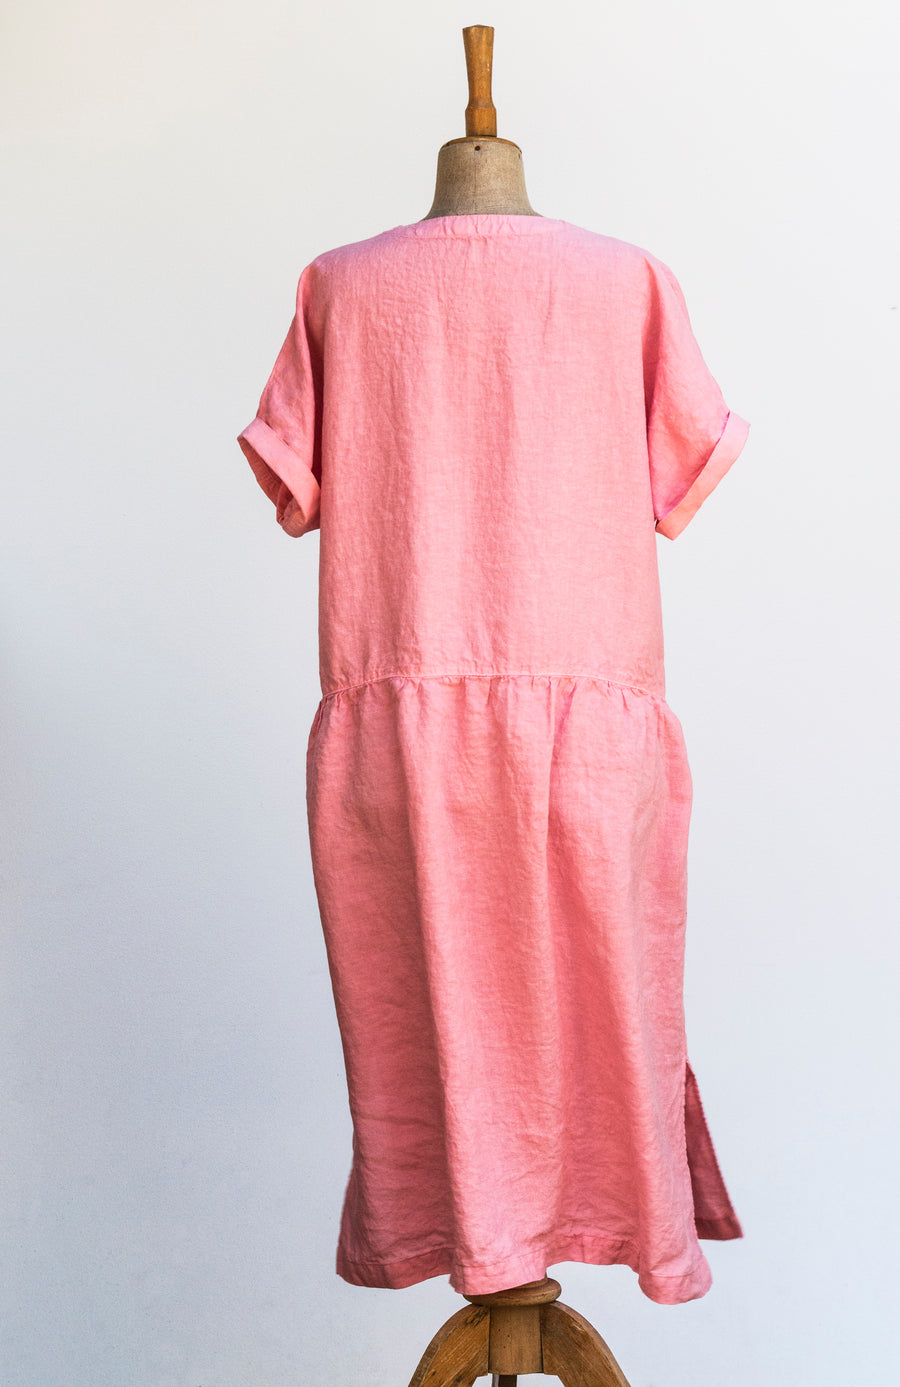 Country dress made of extra fine linen in the shade Quartz Pink